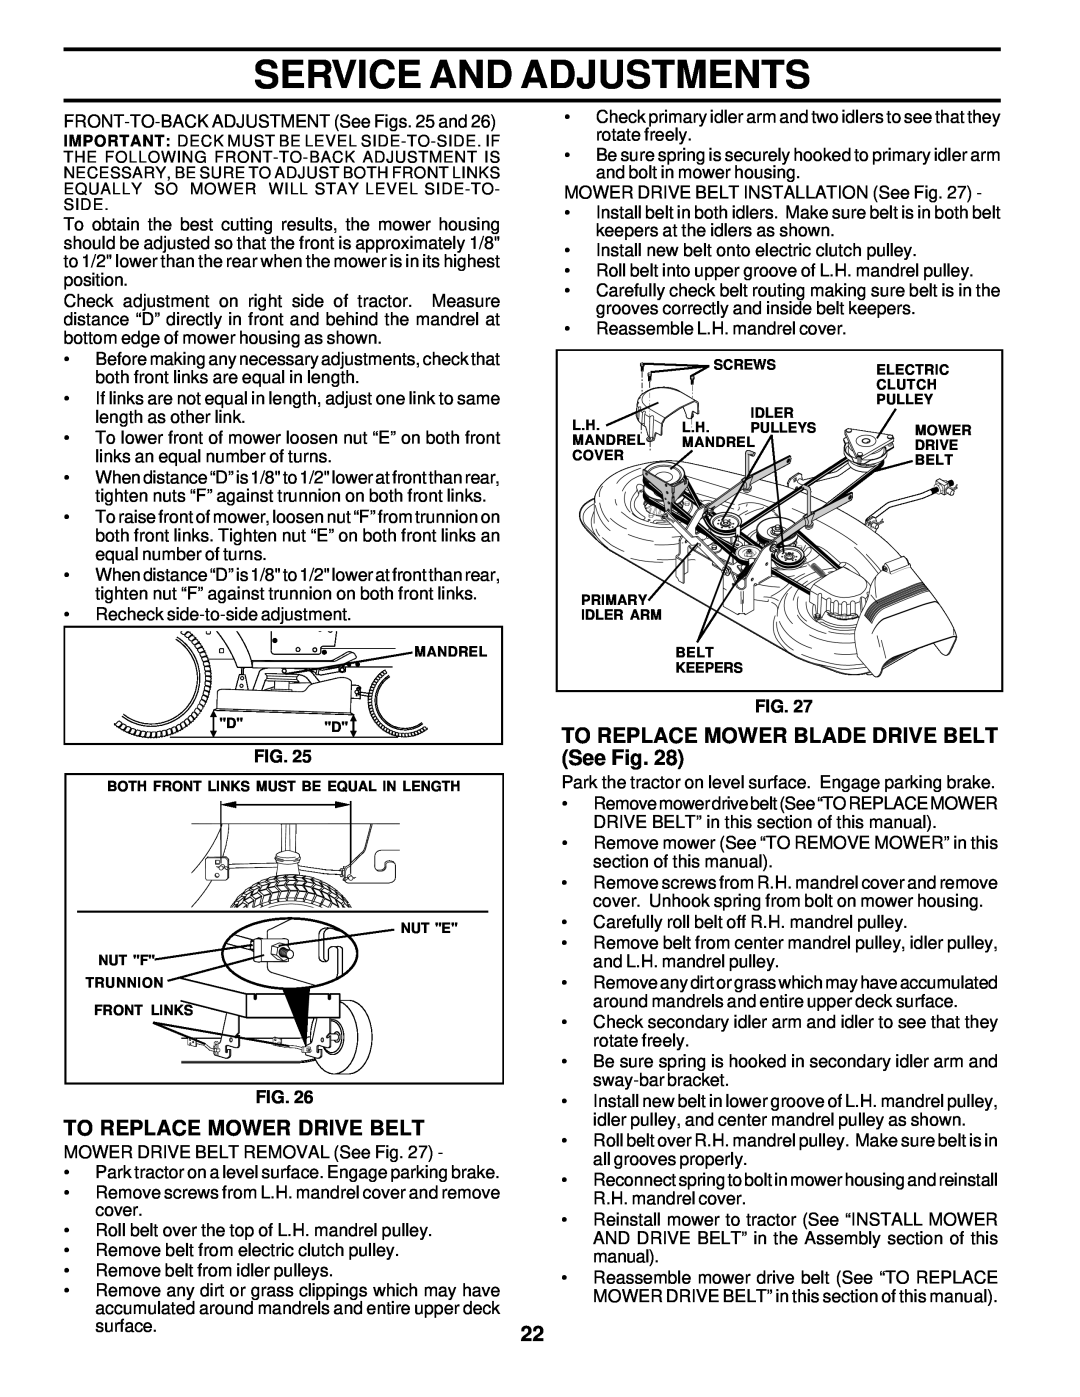 Poulan 178249 owner manual To Replace Mower Drive Belt, TO REPLACE MOWER BLADE DRIVE BELT See Fig, Service And Adjustments 